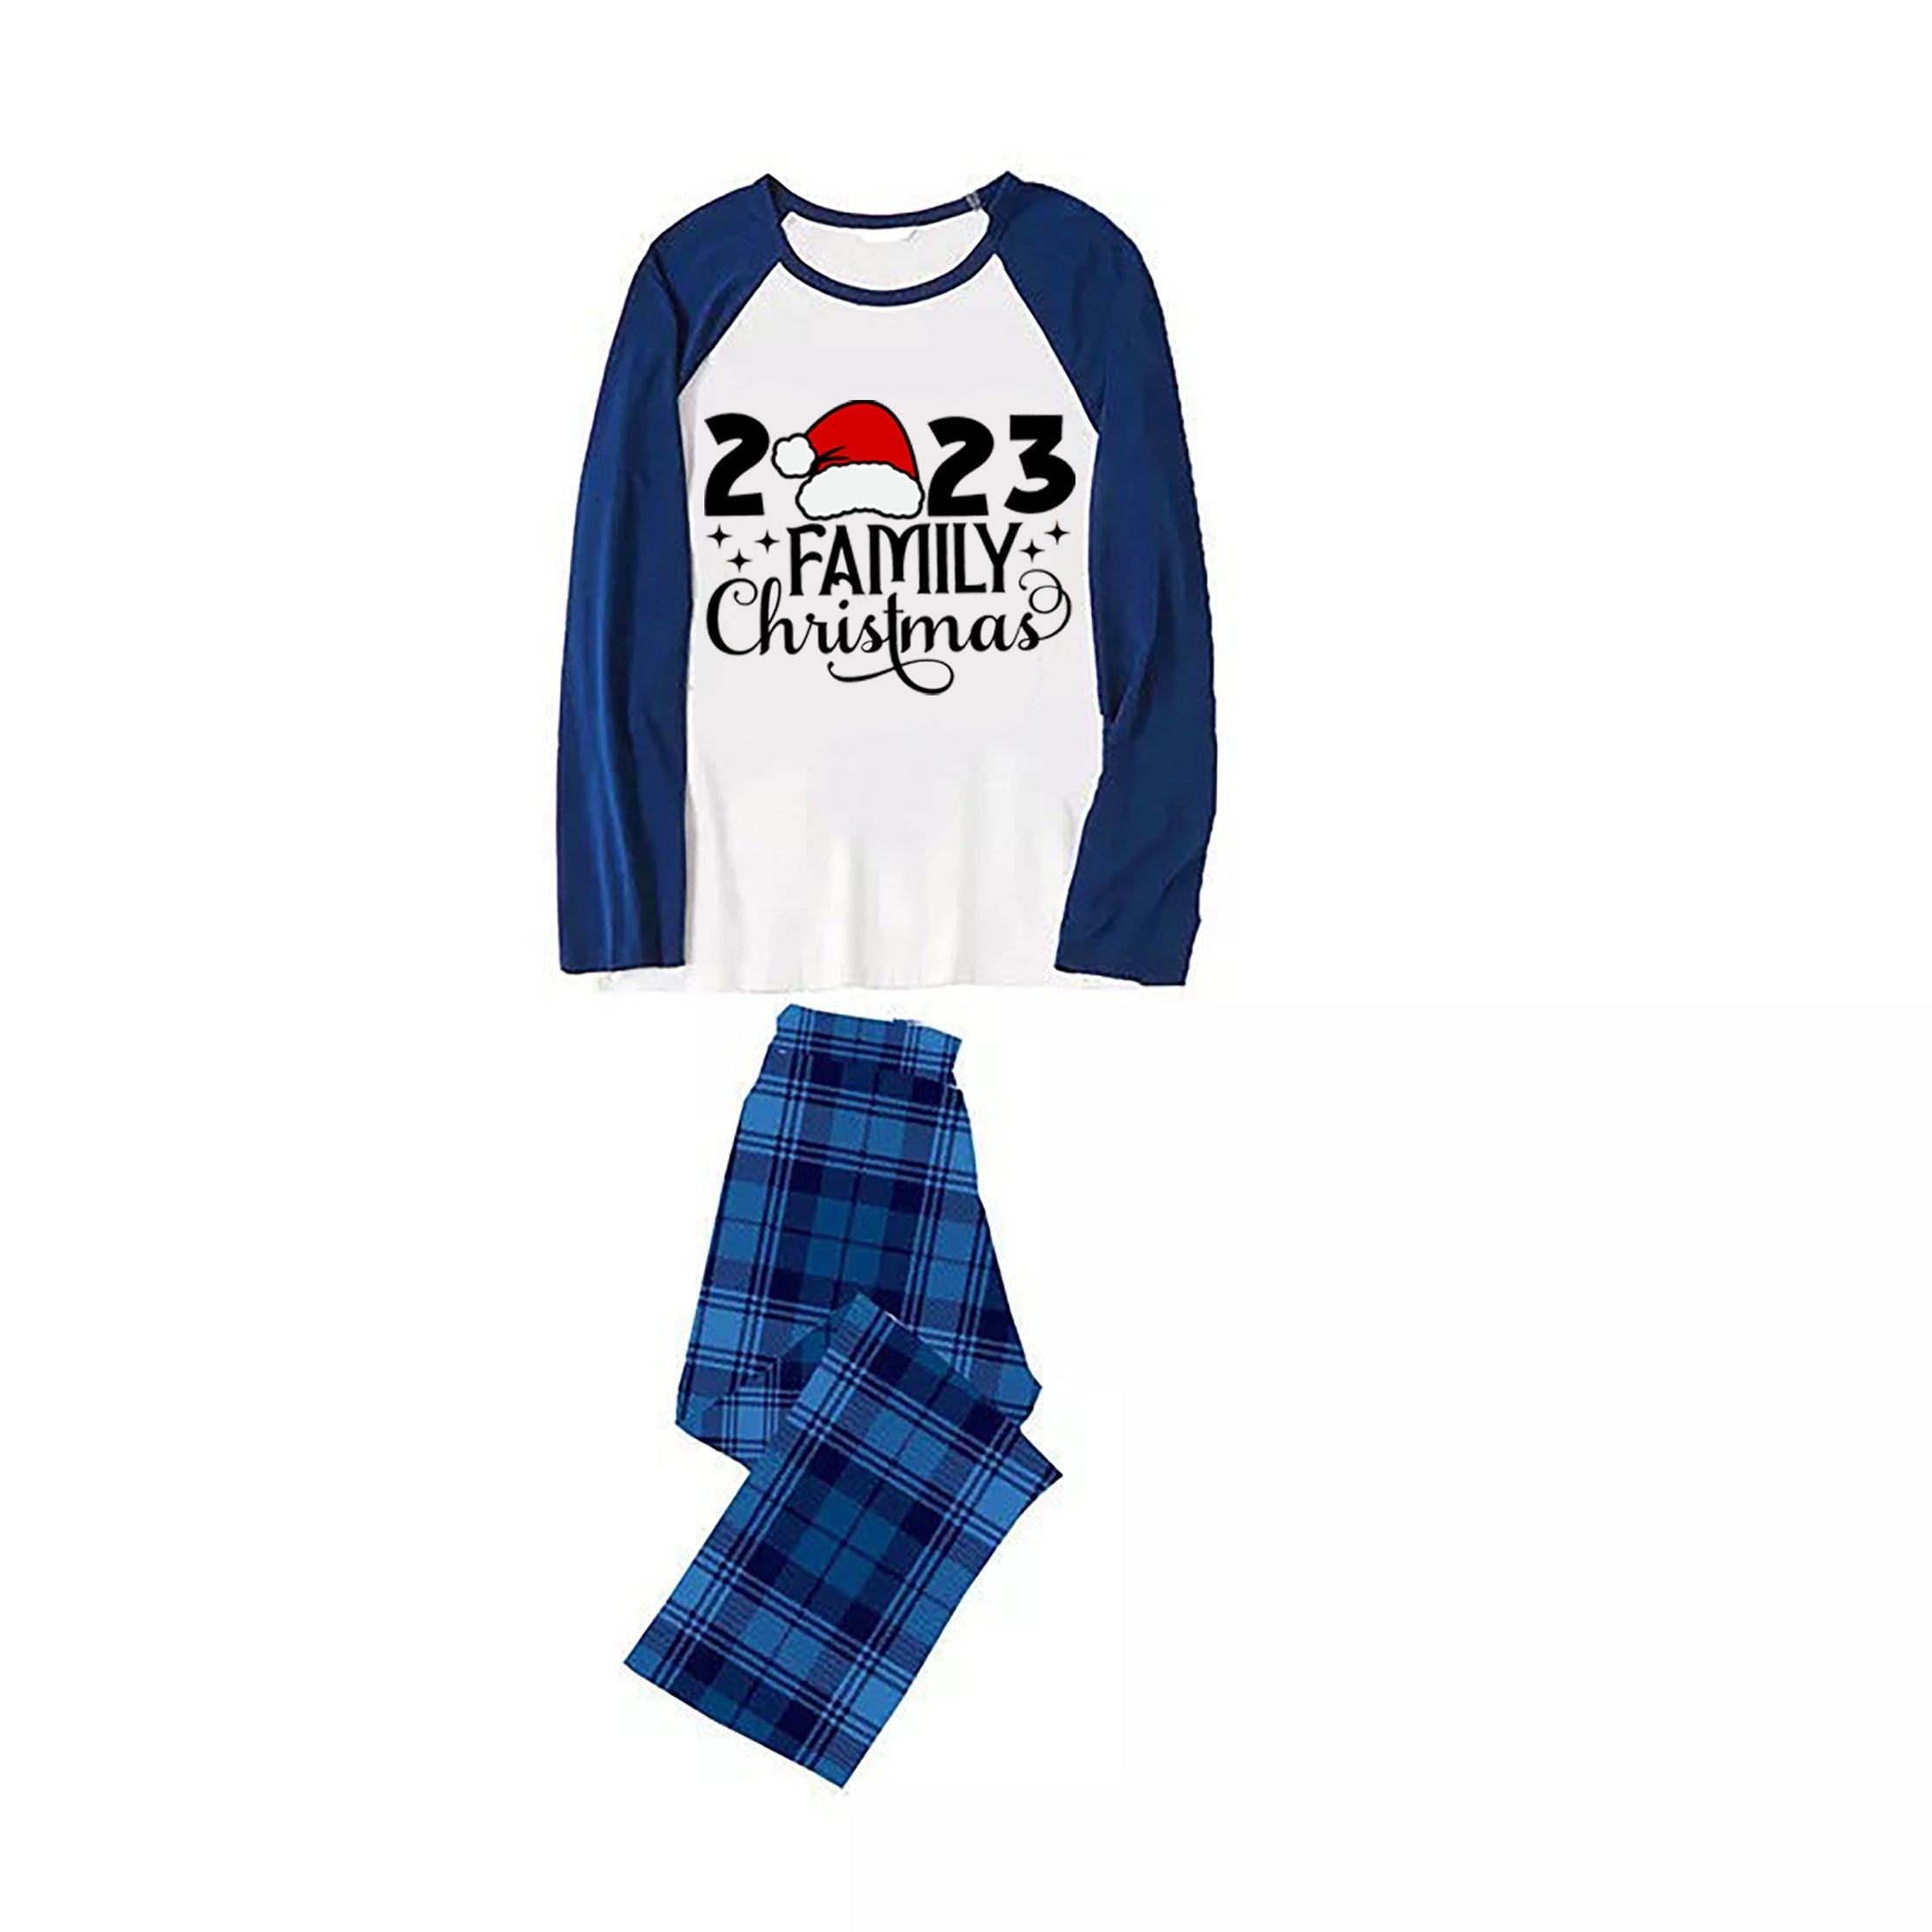 Christmas Cute Cartoon Santa Hat Patterned and '2023 FAMILY Christmas ' Letter Print Casual Long Sleeve Sweatshirts Contrast Blue & White Top and Black and Blue Plaid Pants Family Matching Pajamas Sets